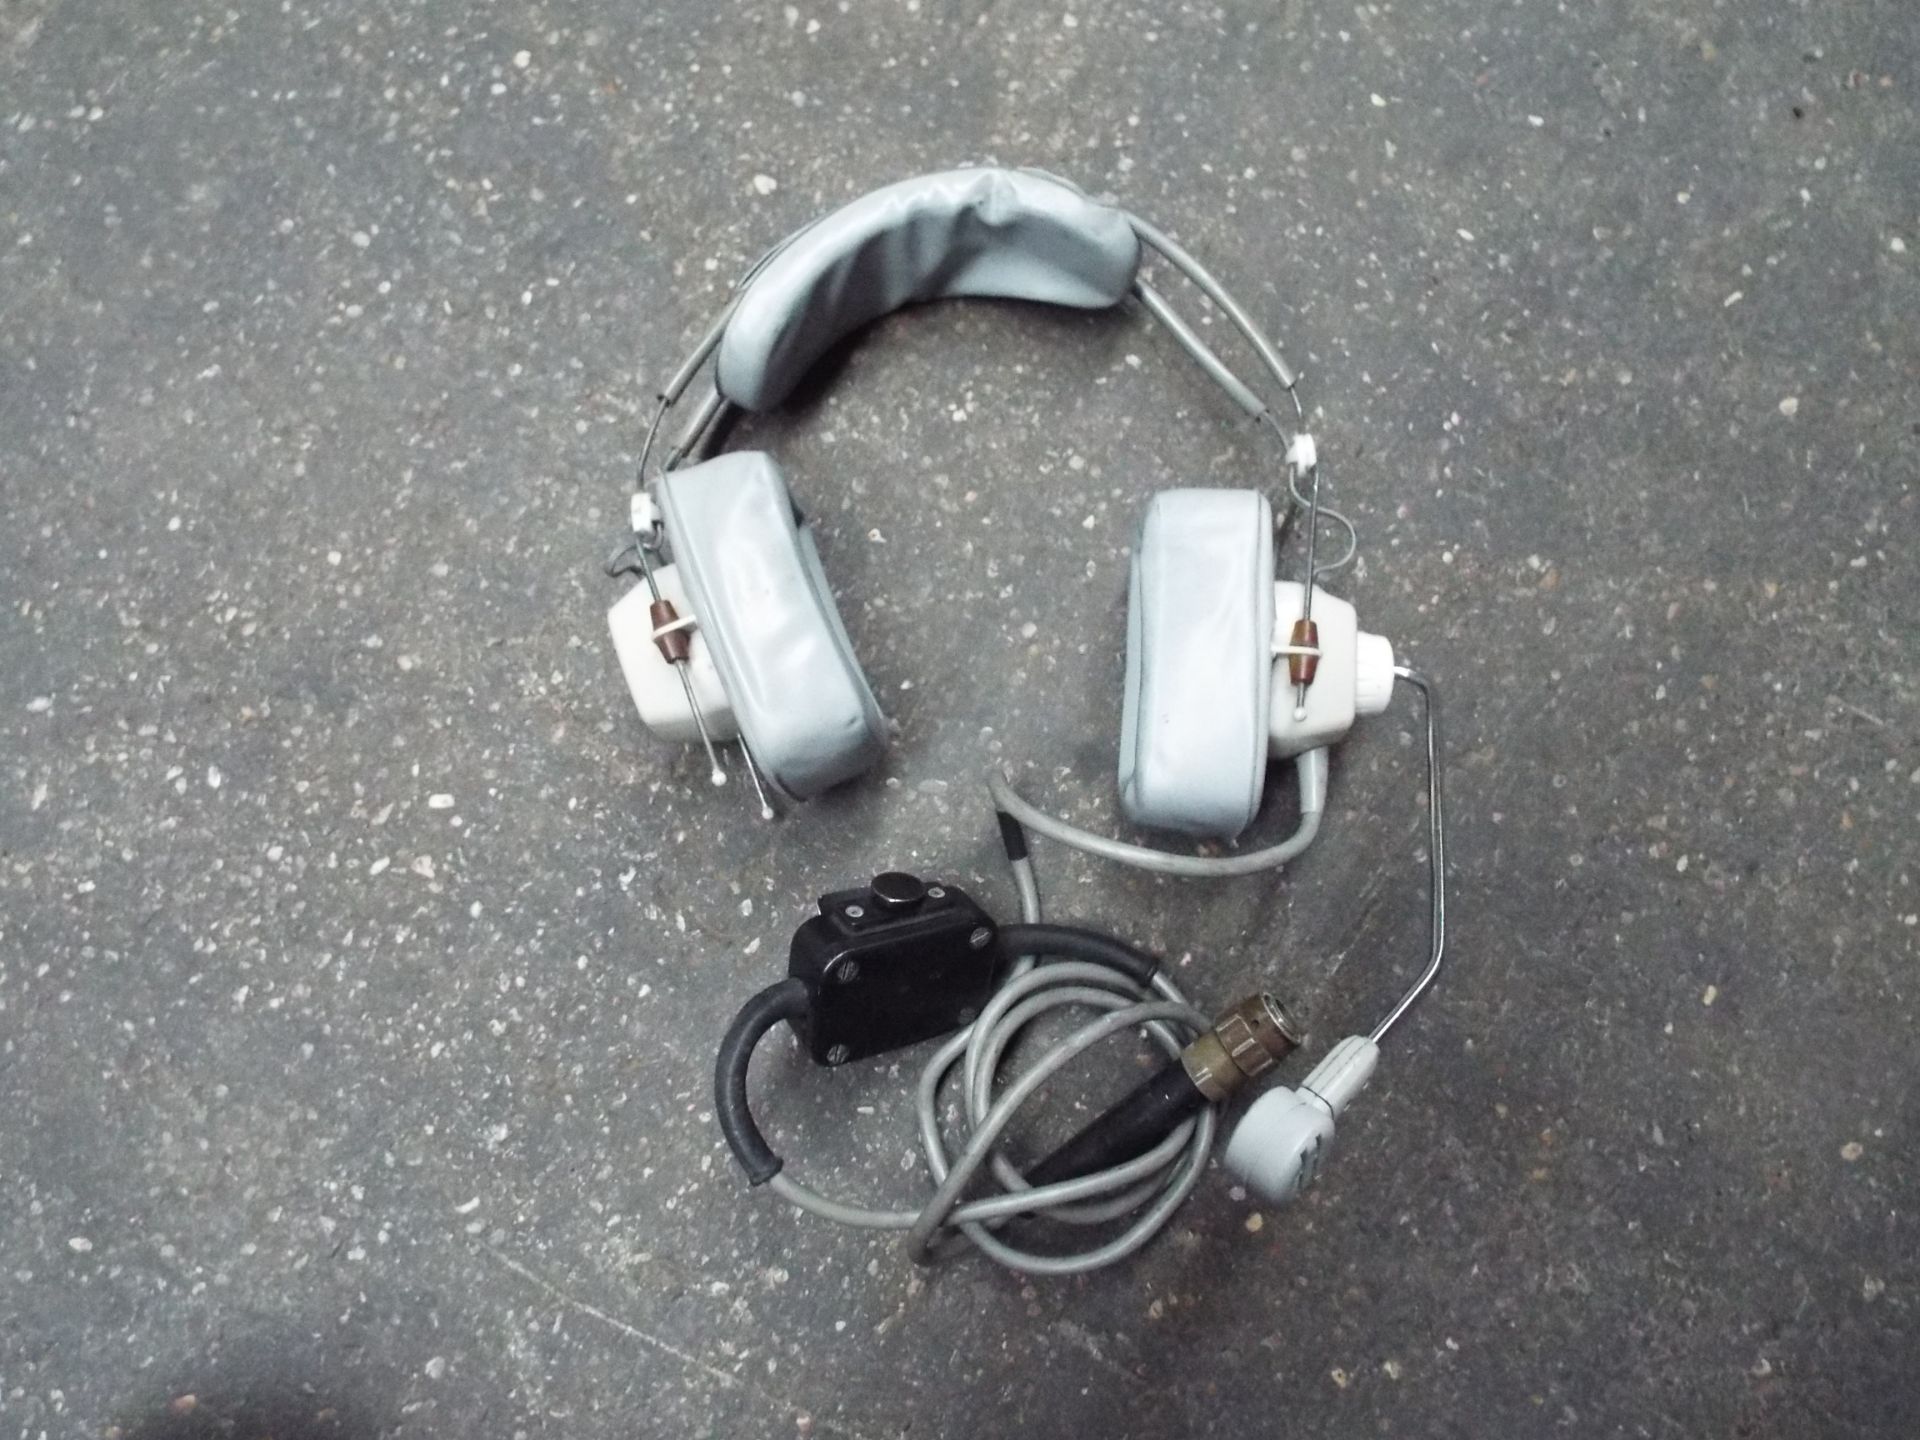 11 x Amplivox Astrolite Headsets as used by Air Traffic Control and Pilots - Image 2 of 5